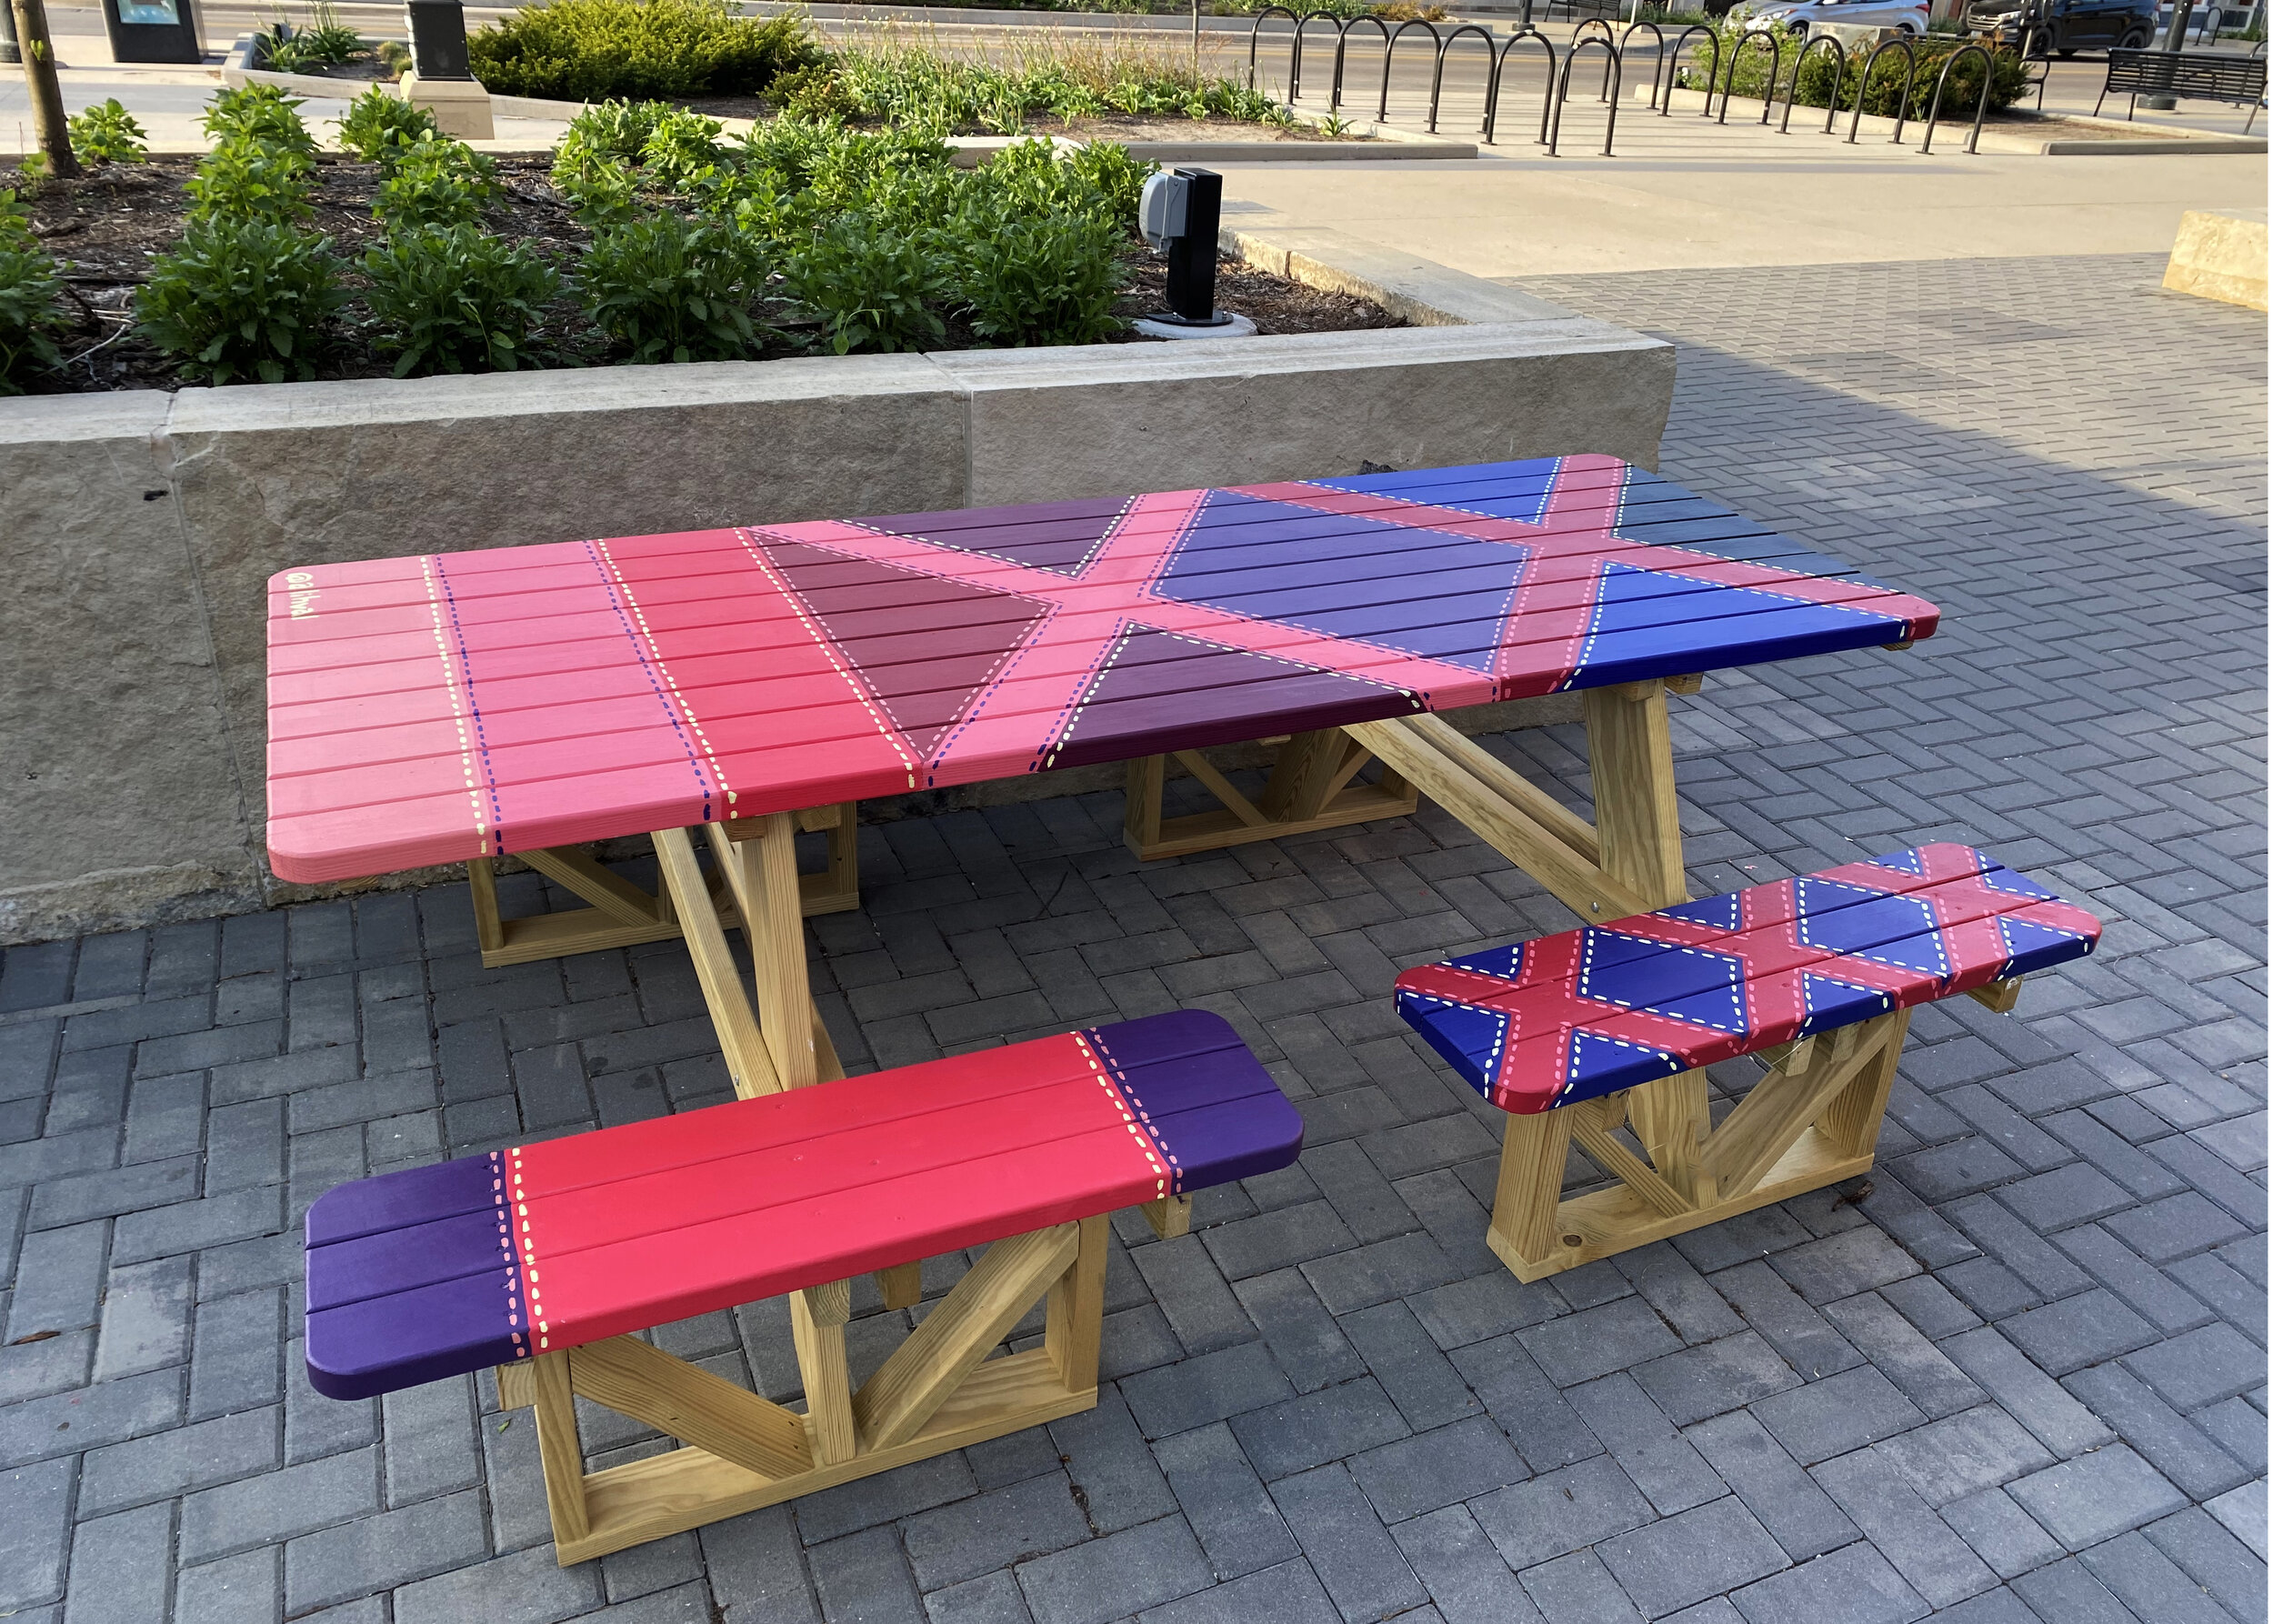   Neon Quilts  (one of six picnic tables). 2020. Iowa City, IA.  